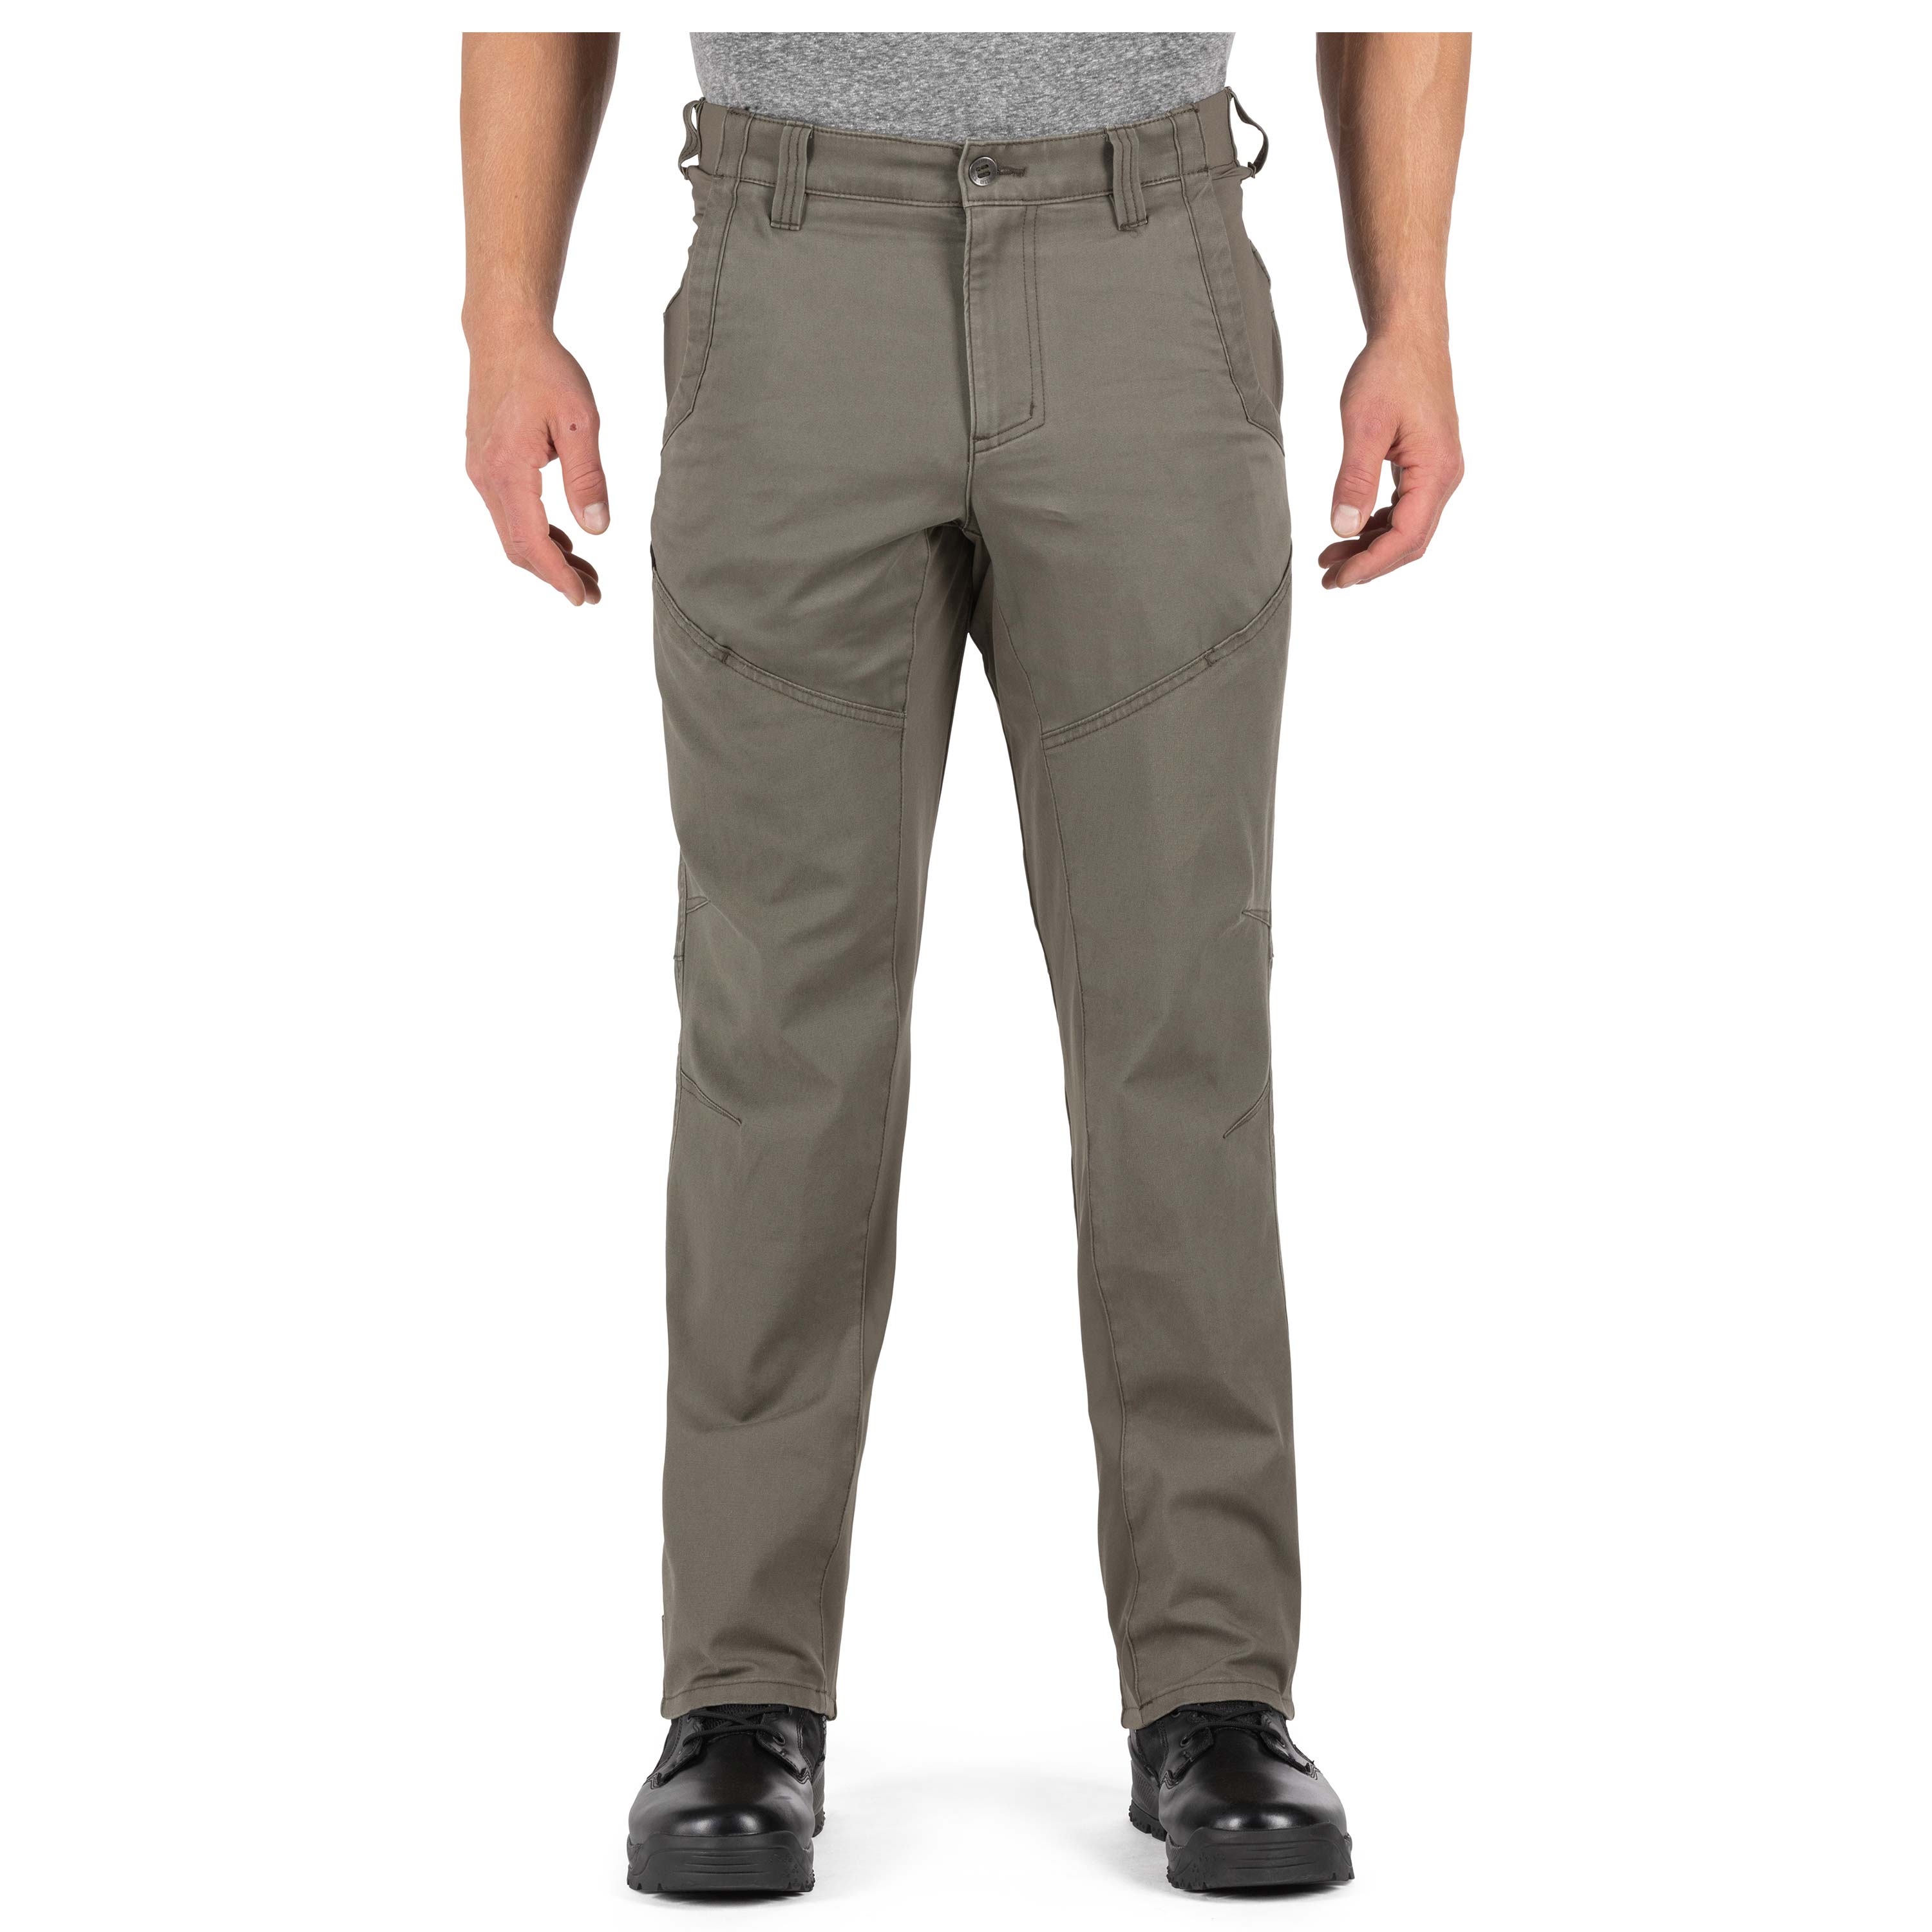 Purchase the 5.11 Quest Pant ranger green by ASMC